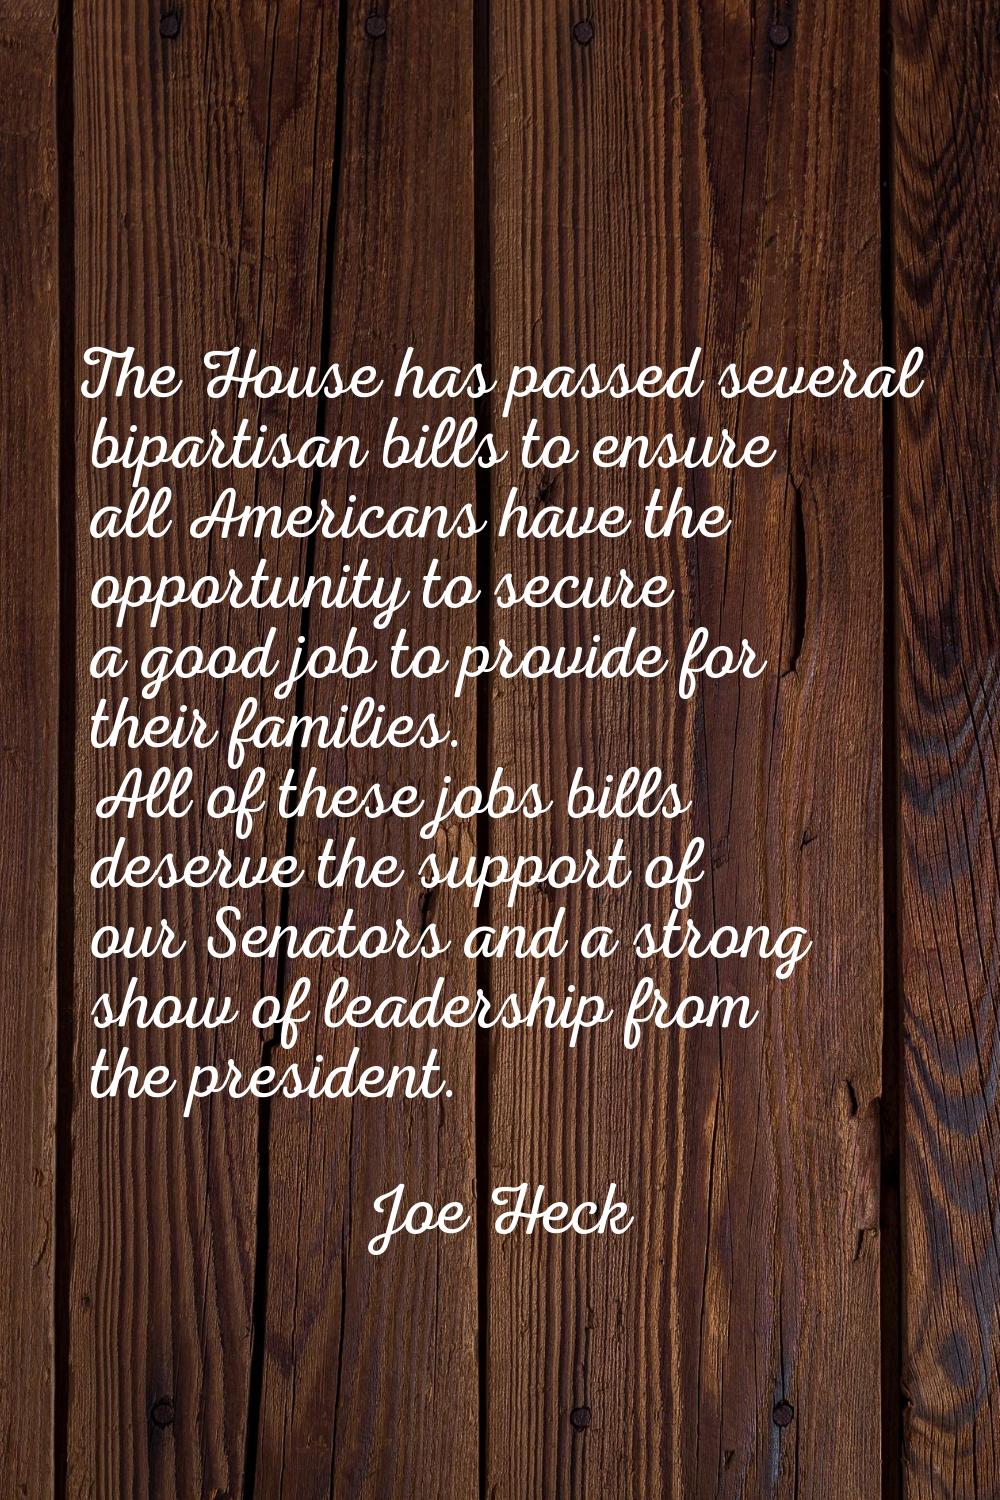 The House has passed several bipartisan bills to ensure all Americans have the opportunity to secur